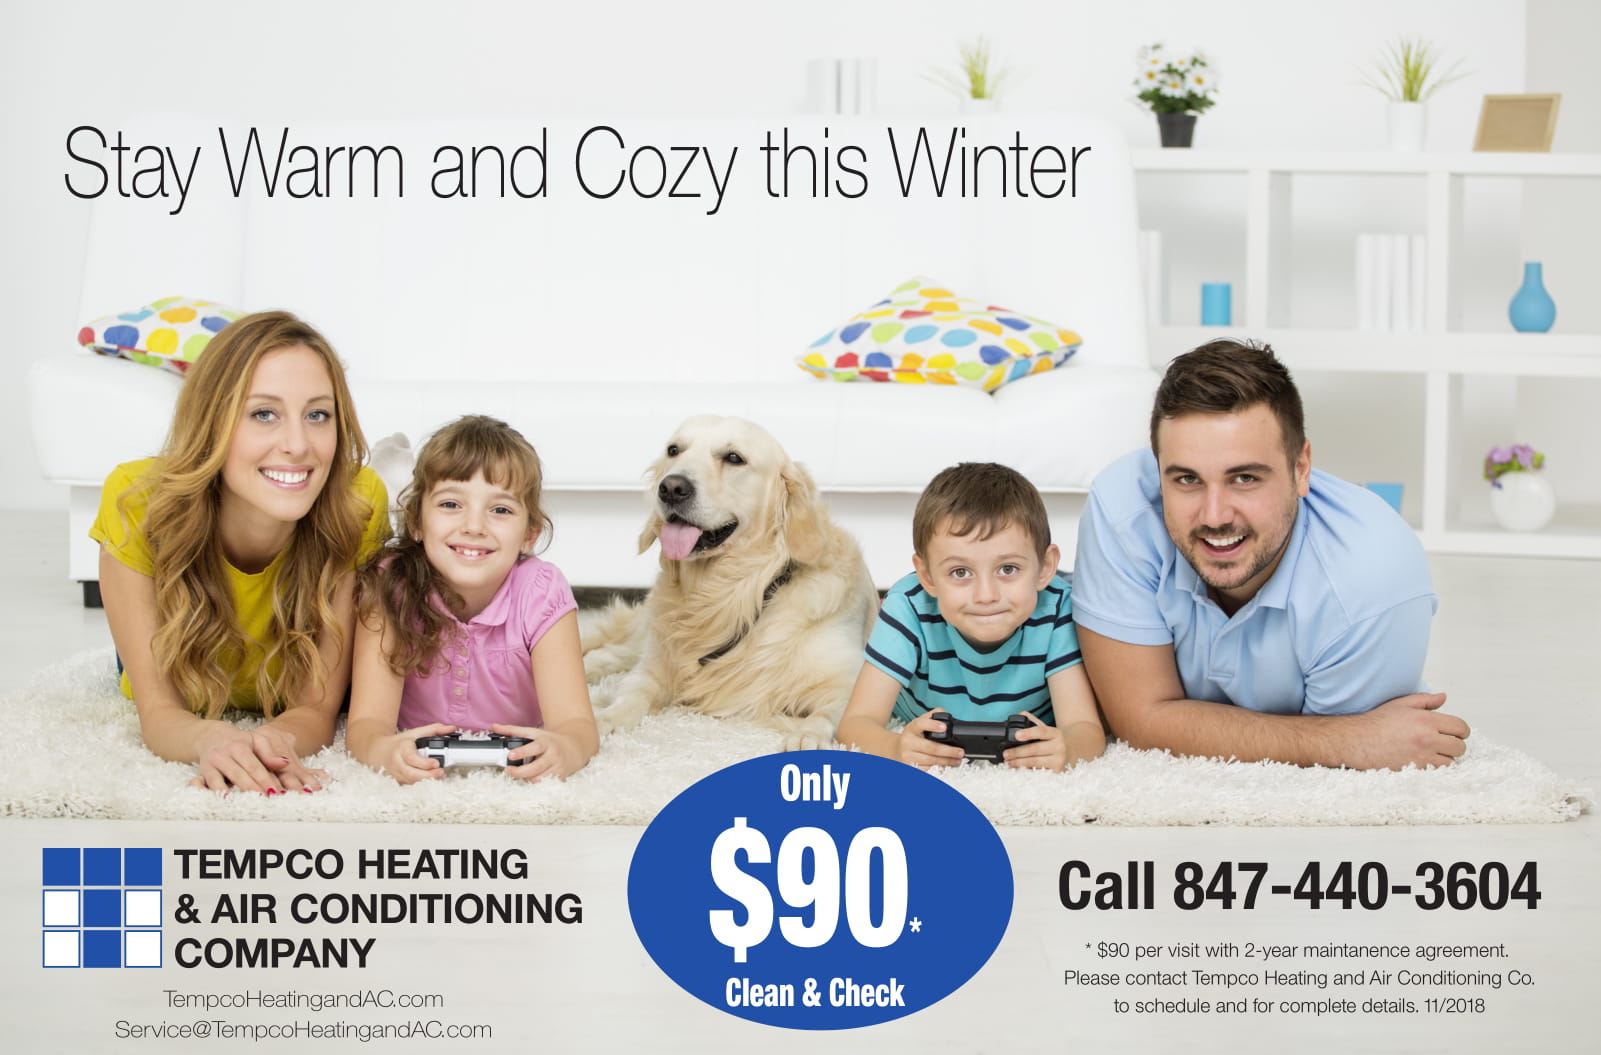 We specialize in Air Conditioner service in Elgin IL so call Tempco Heating and Air Conditioning.